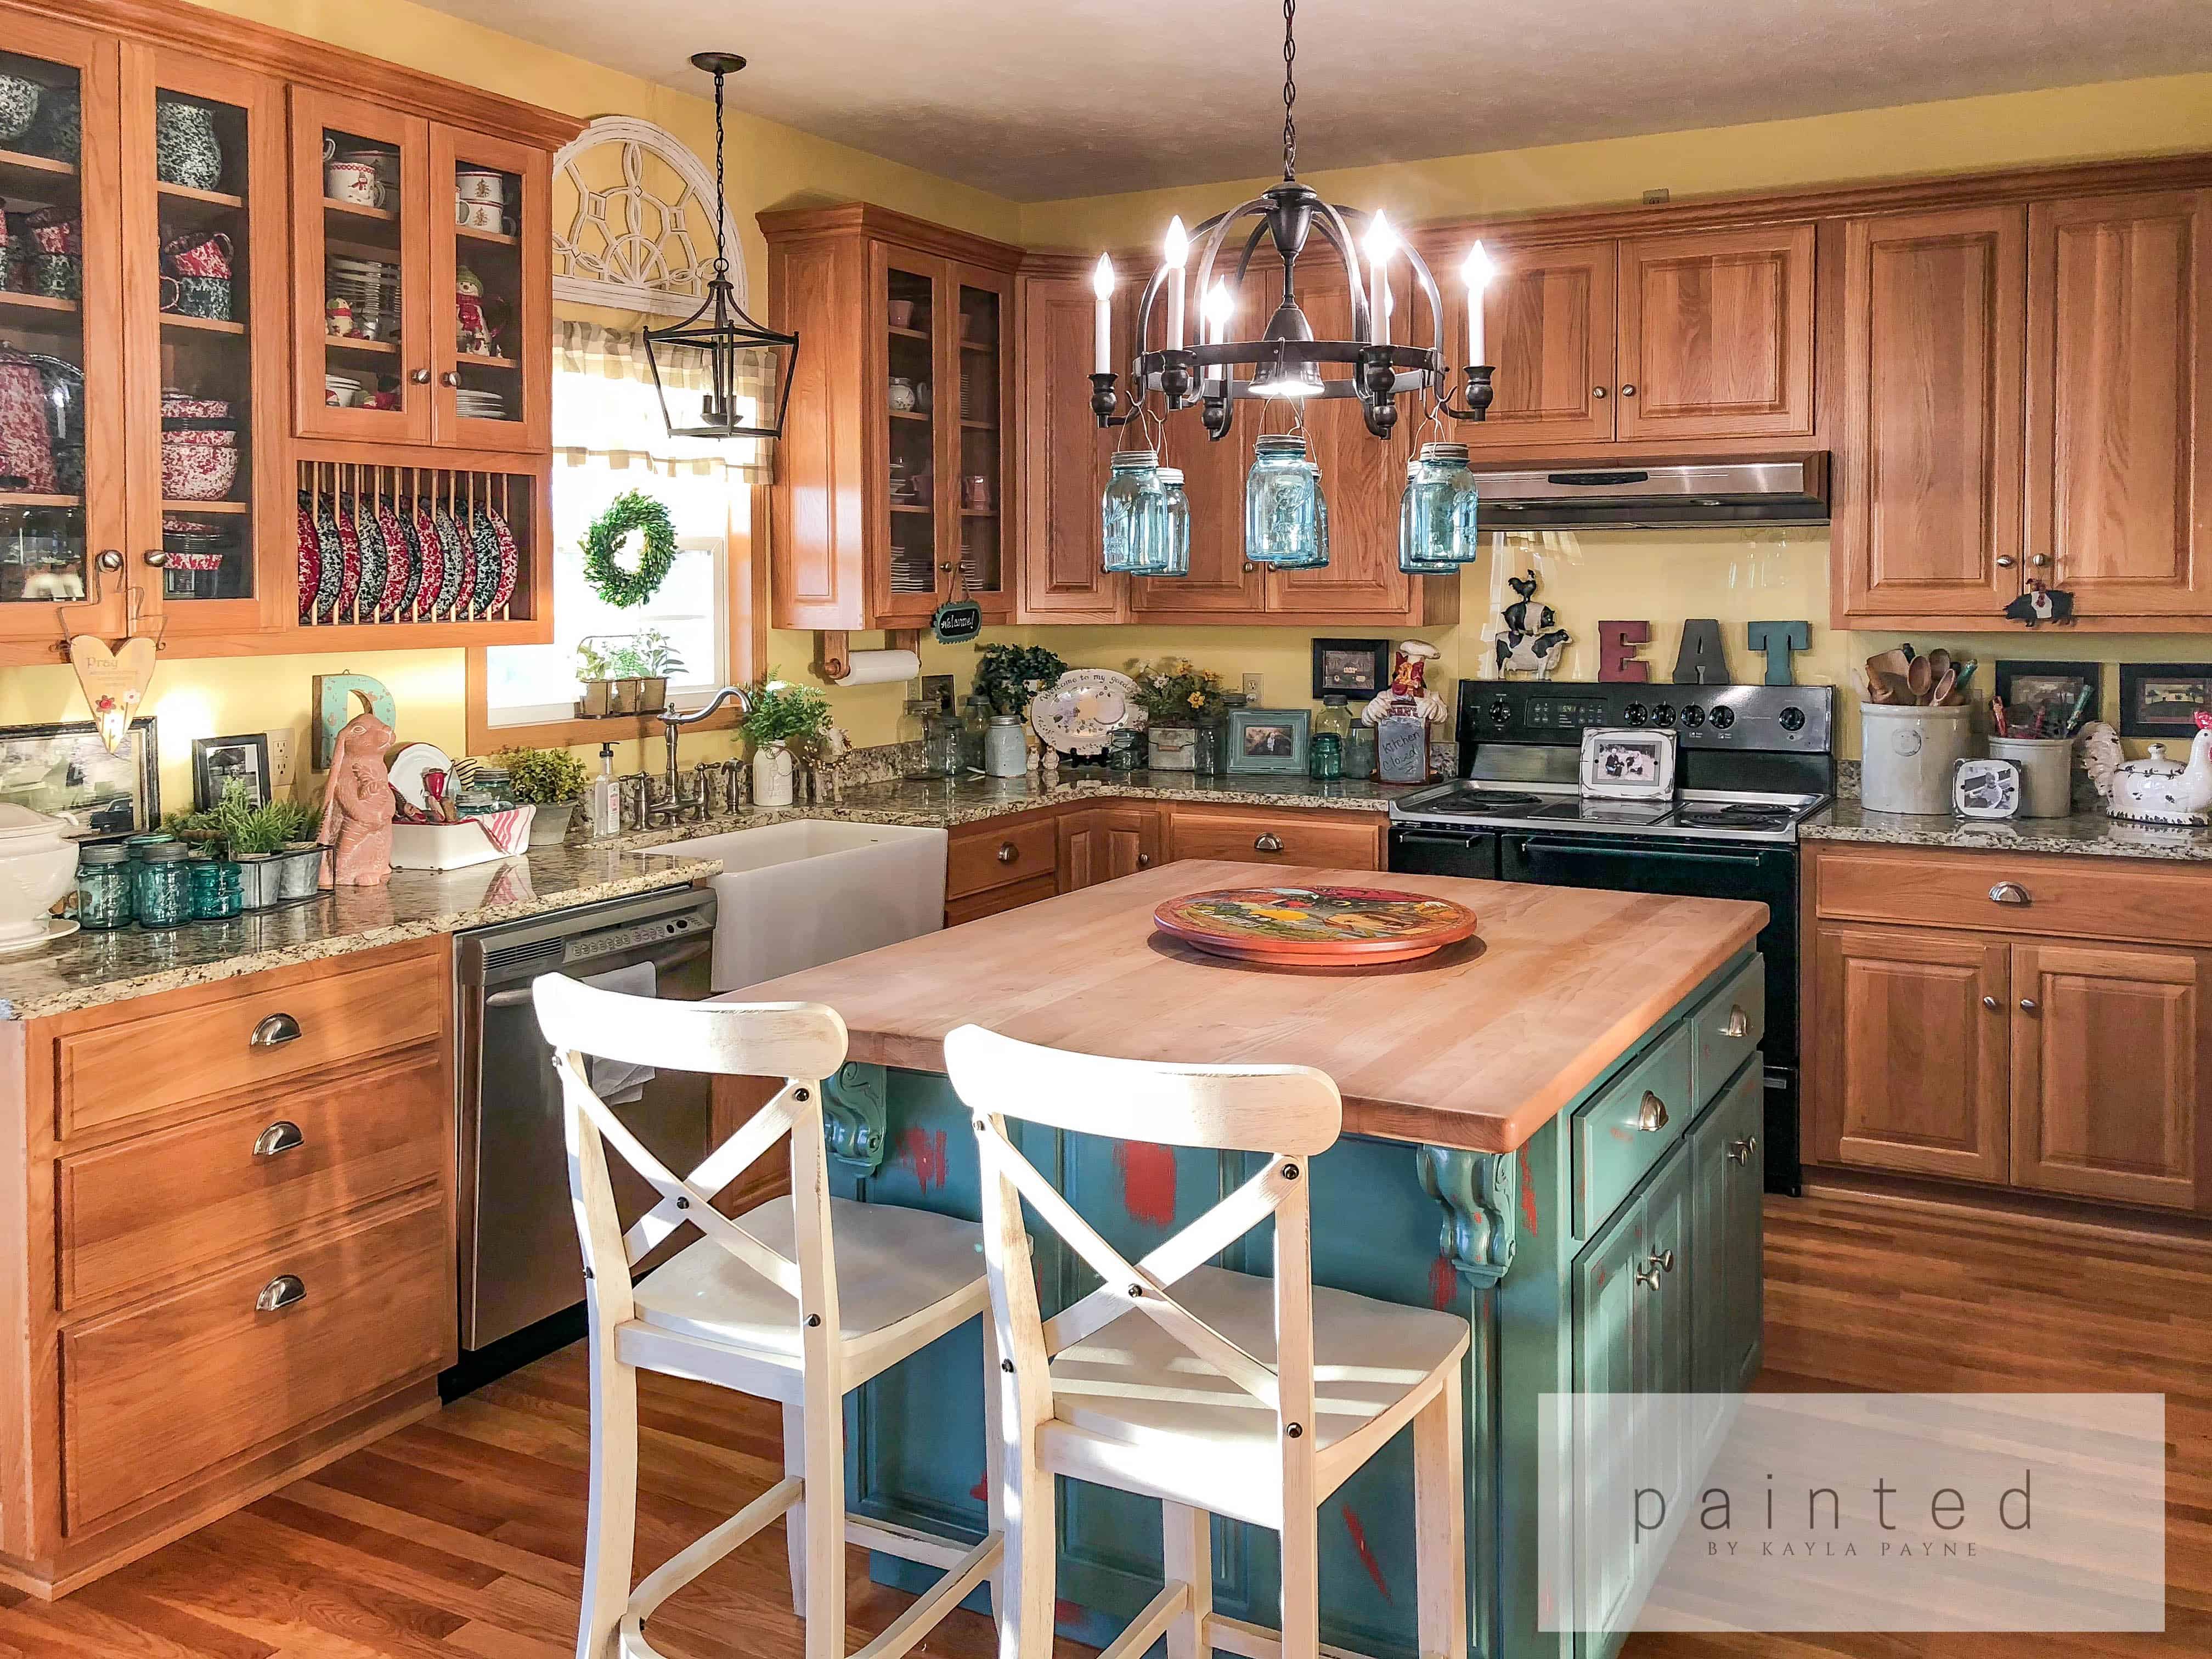 Farmhouse kitchen gets a cabinet makeover! From Oak To Alabaster!